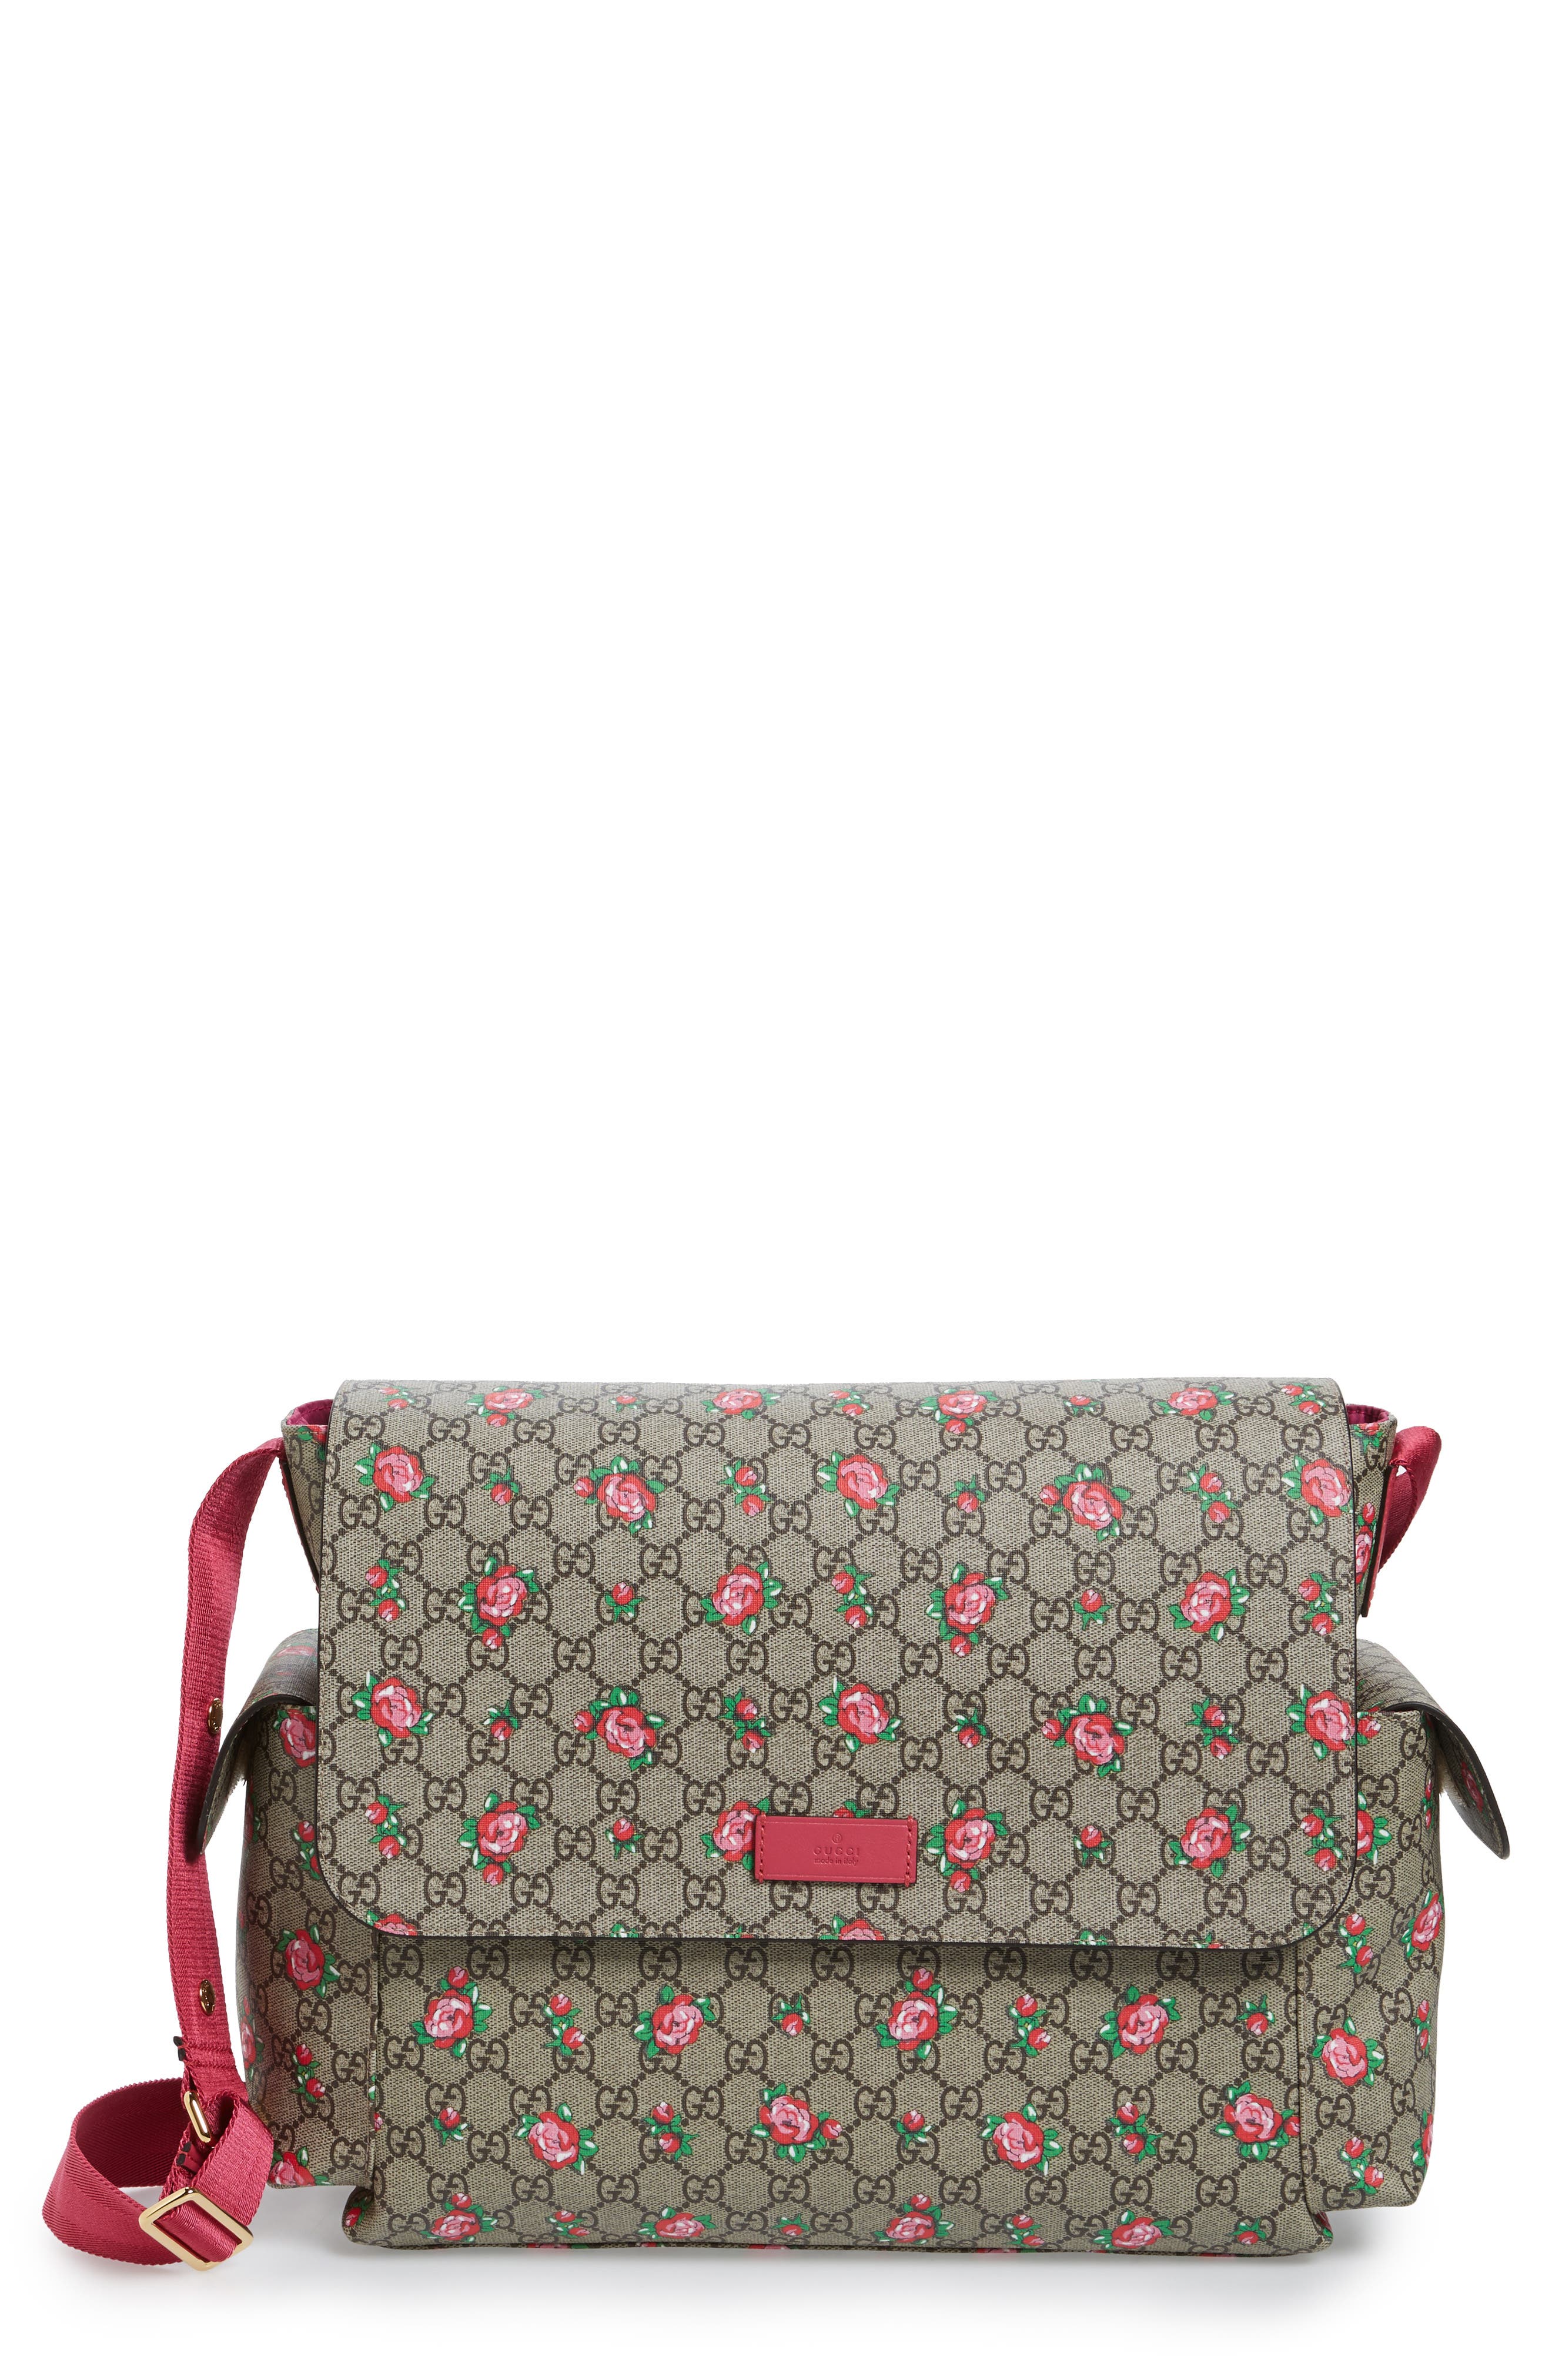 gucci diaper bag with flowers